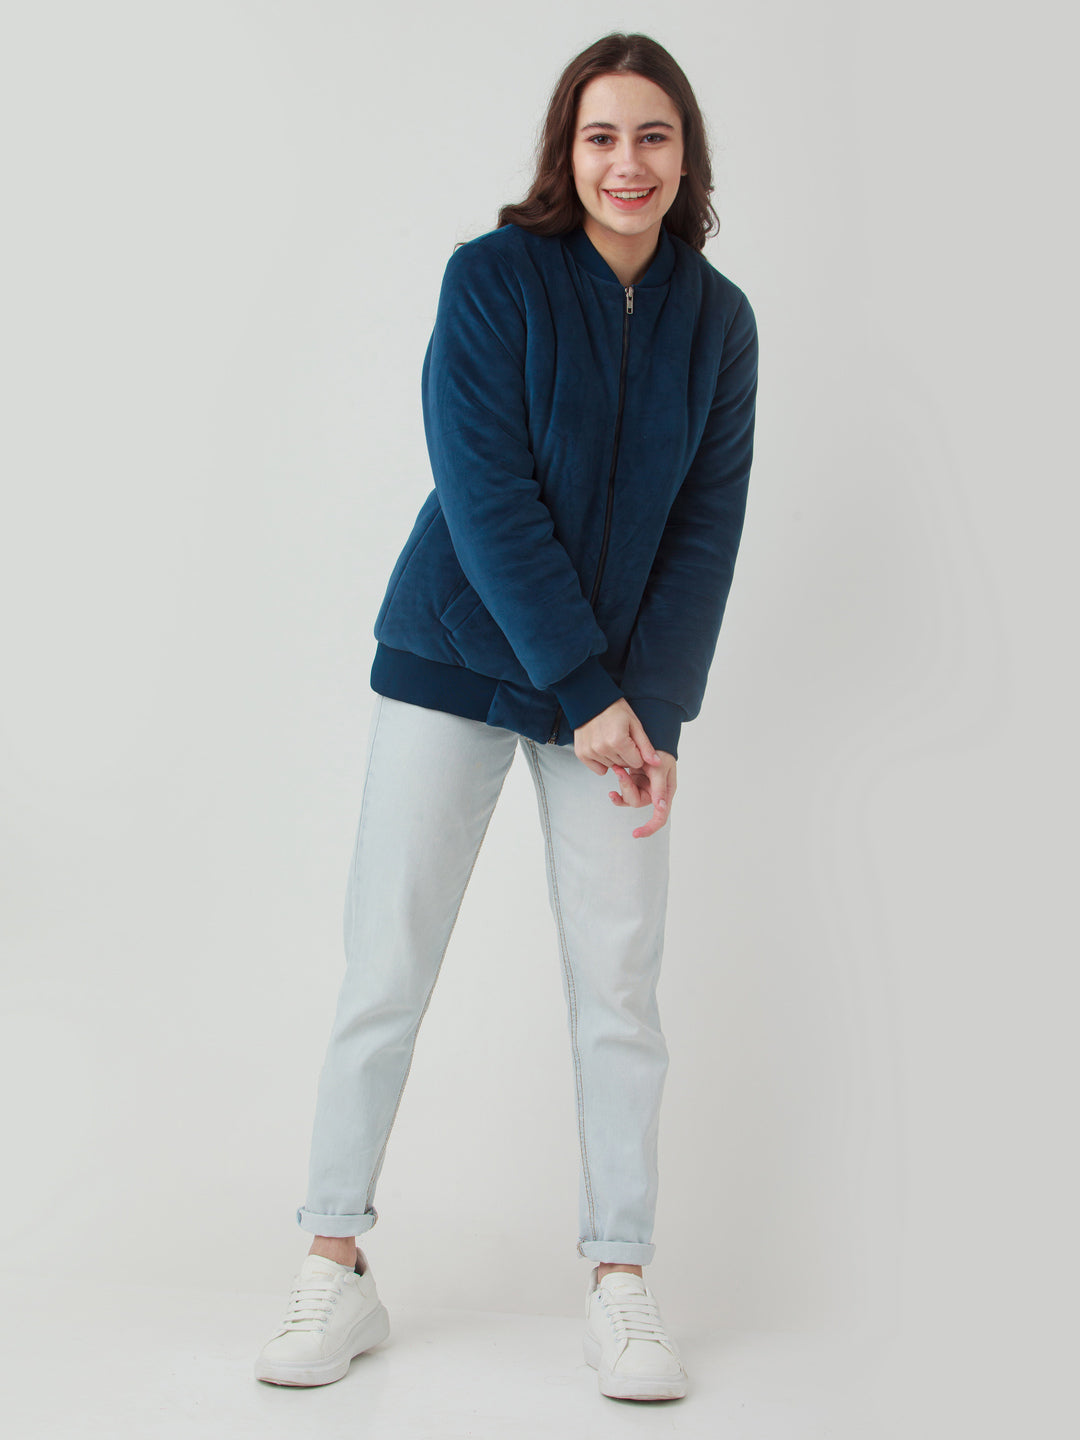 Navy Blue Solid Bomber Jacket For Women